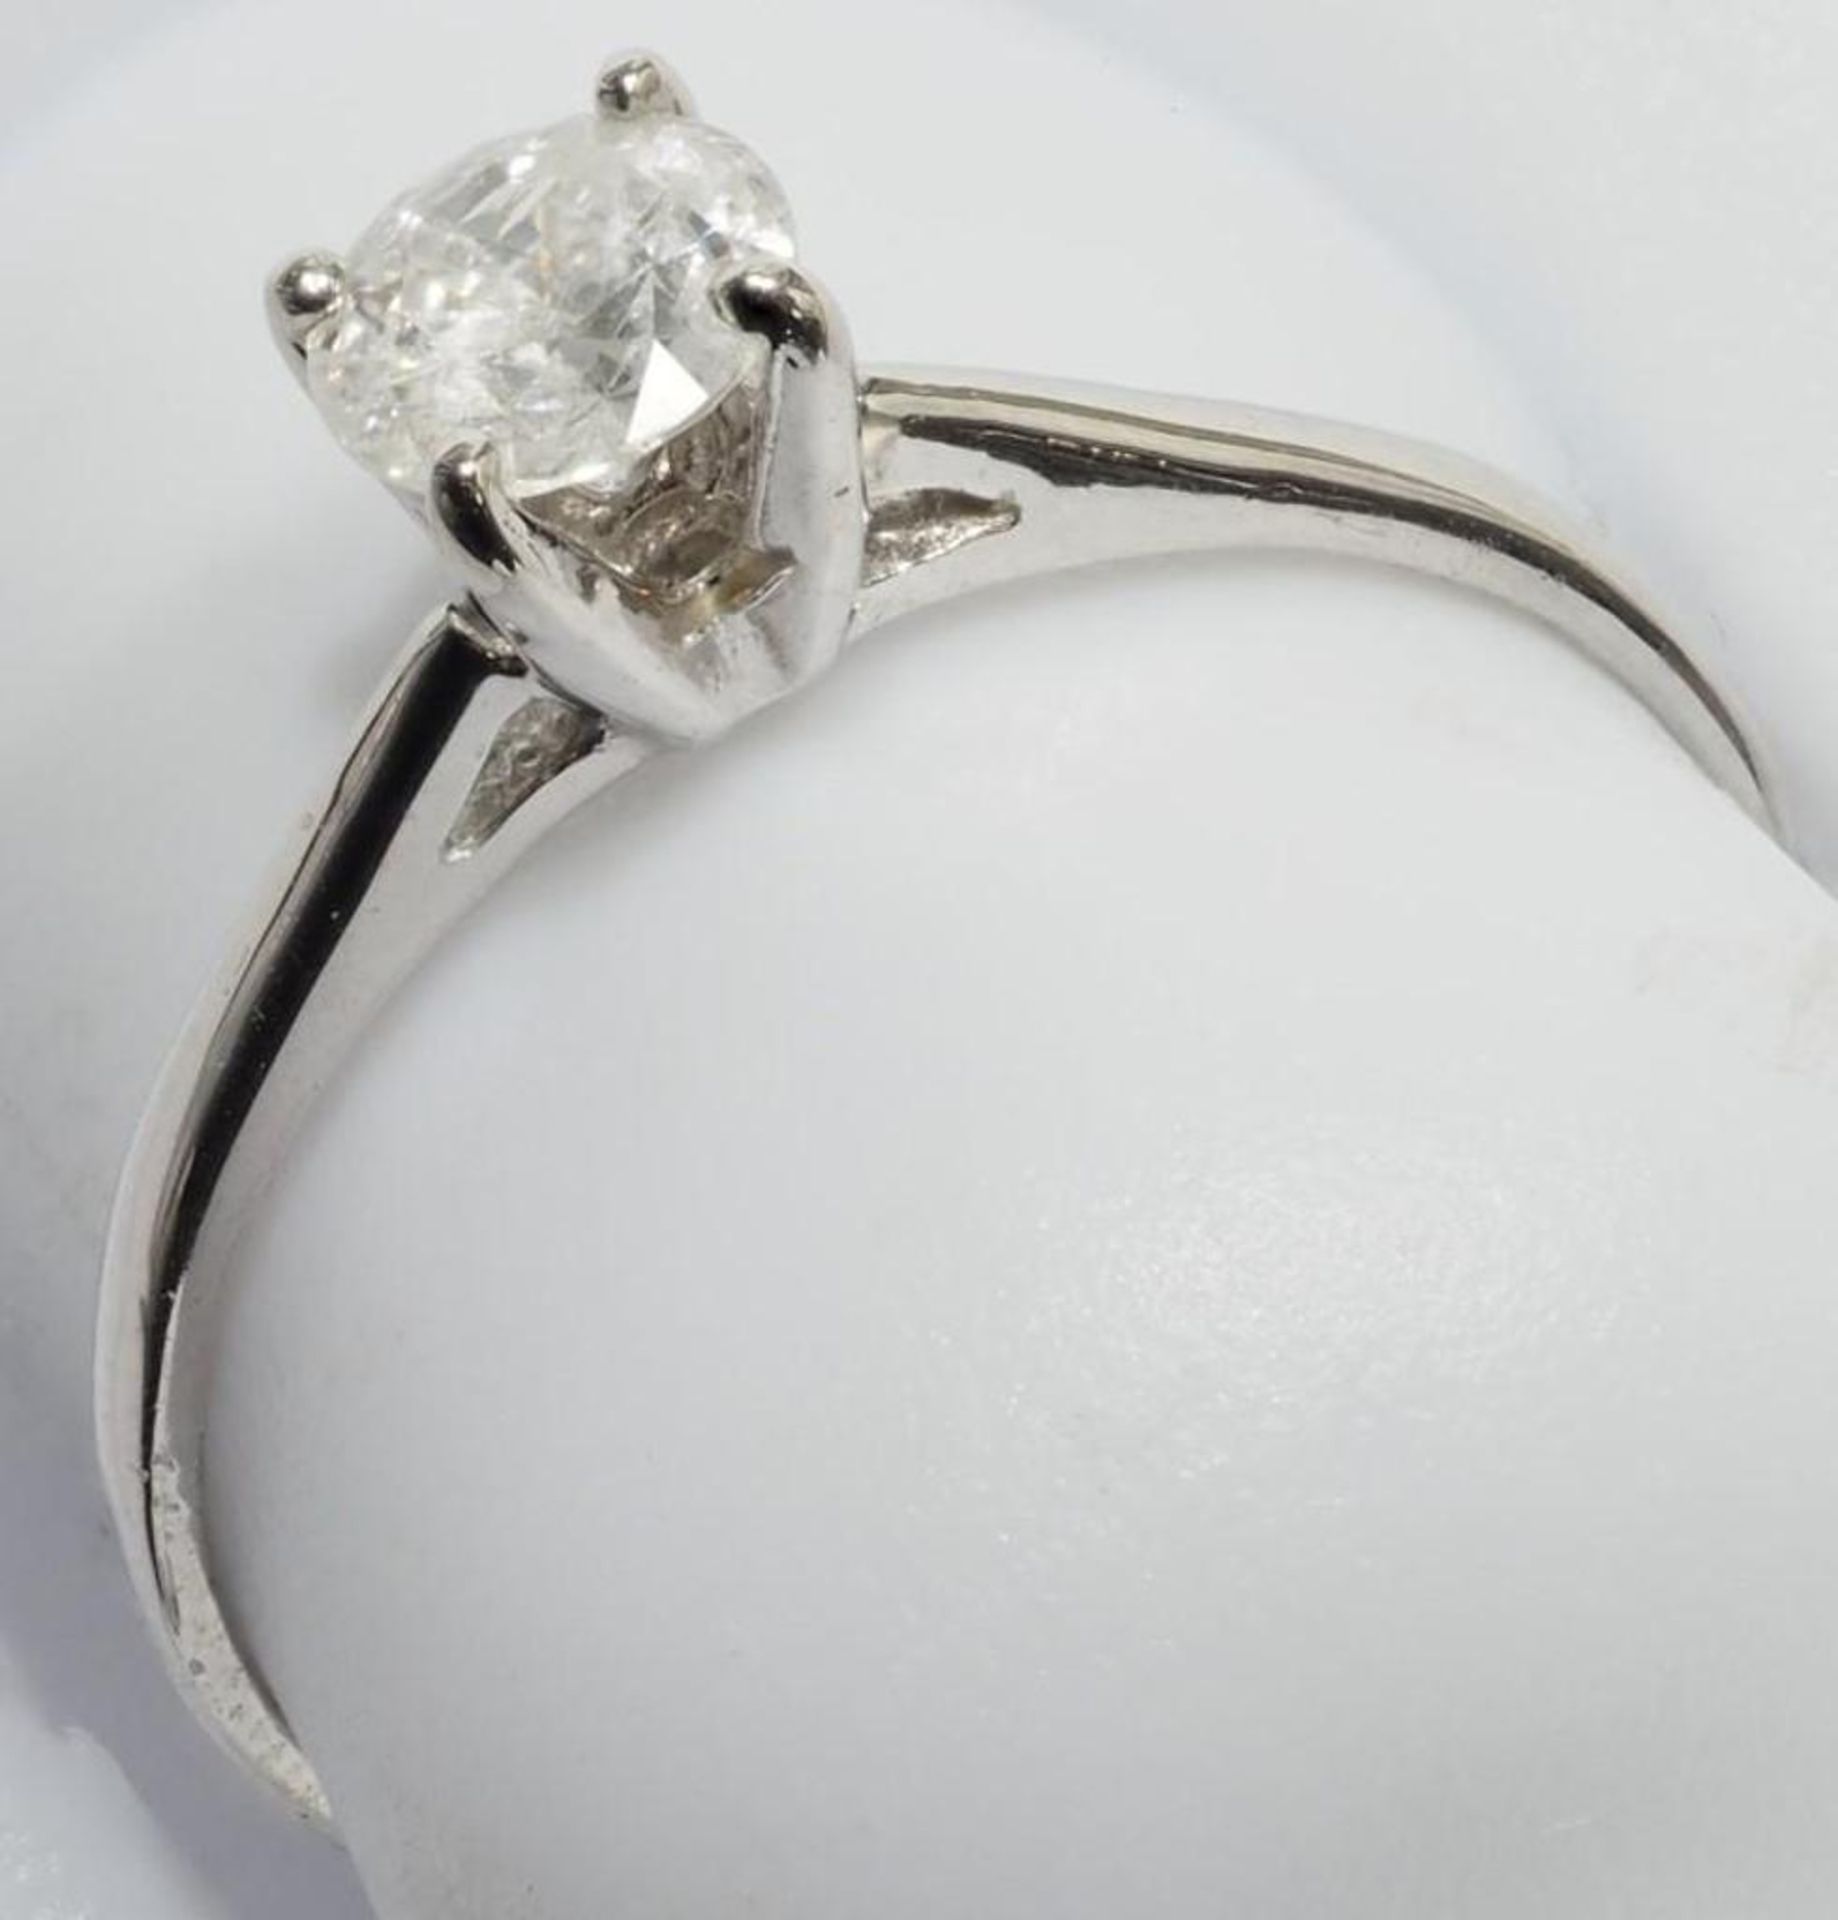 10K White Gold Diamond (0.52ct) Solitaire Ring. Insurance Value $3750 - Image 2 of 4